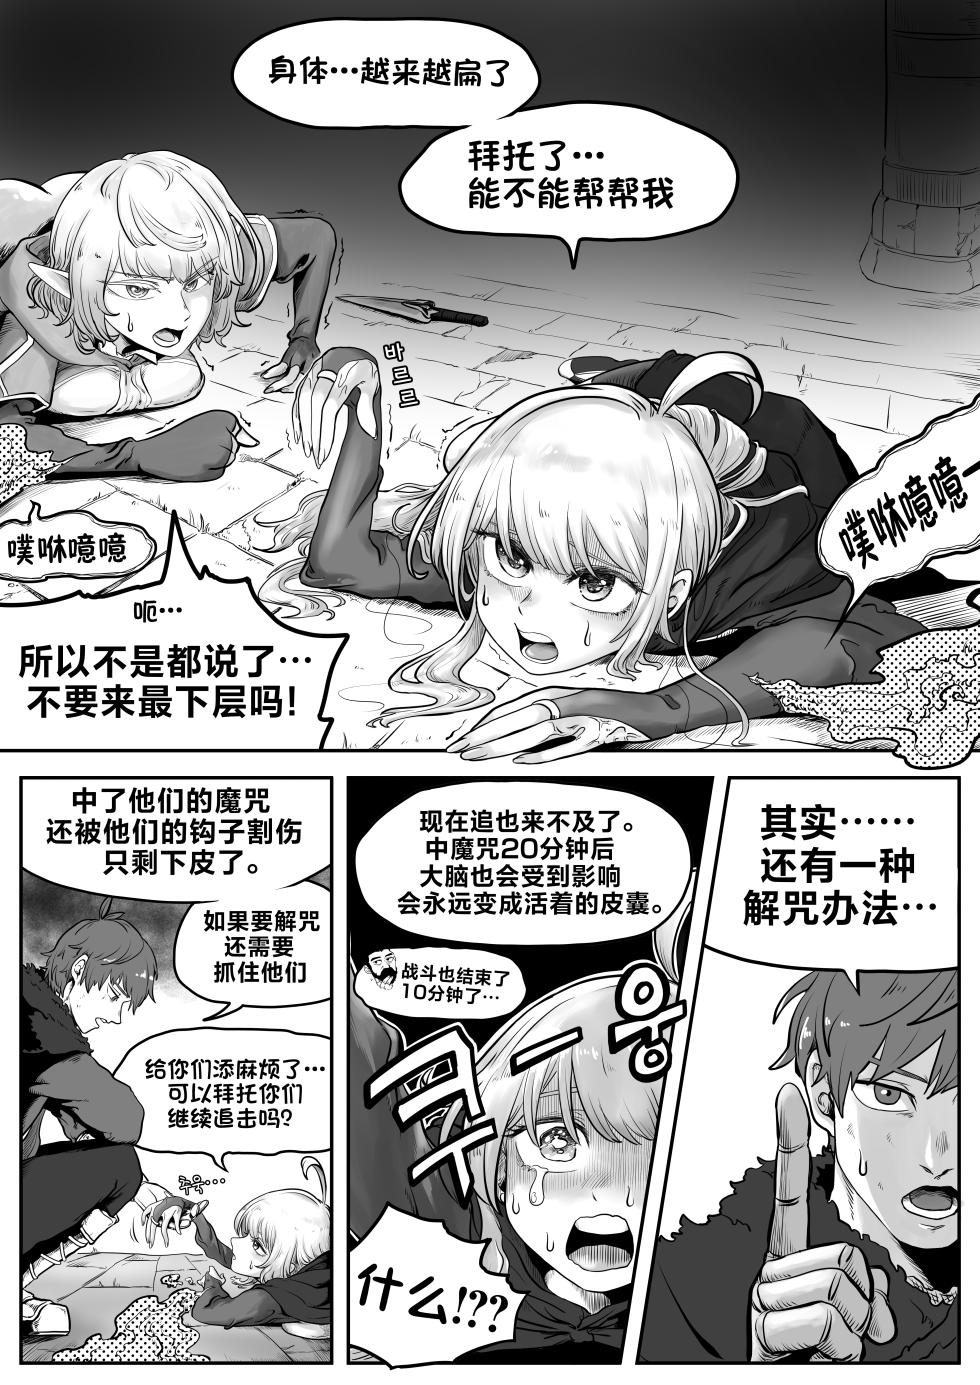 [Duckgu] Your Body Is Good [Chinese] [不咕鸟汉化组] - Page 4